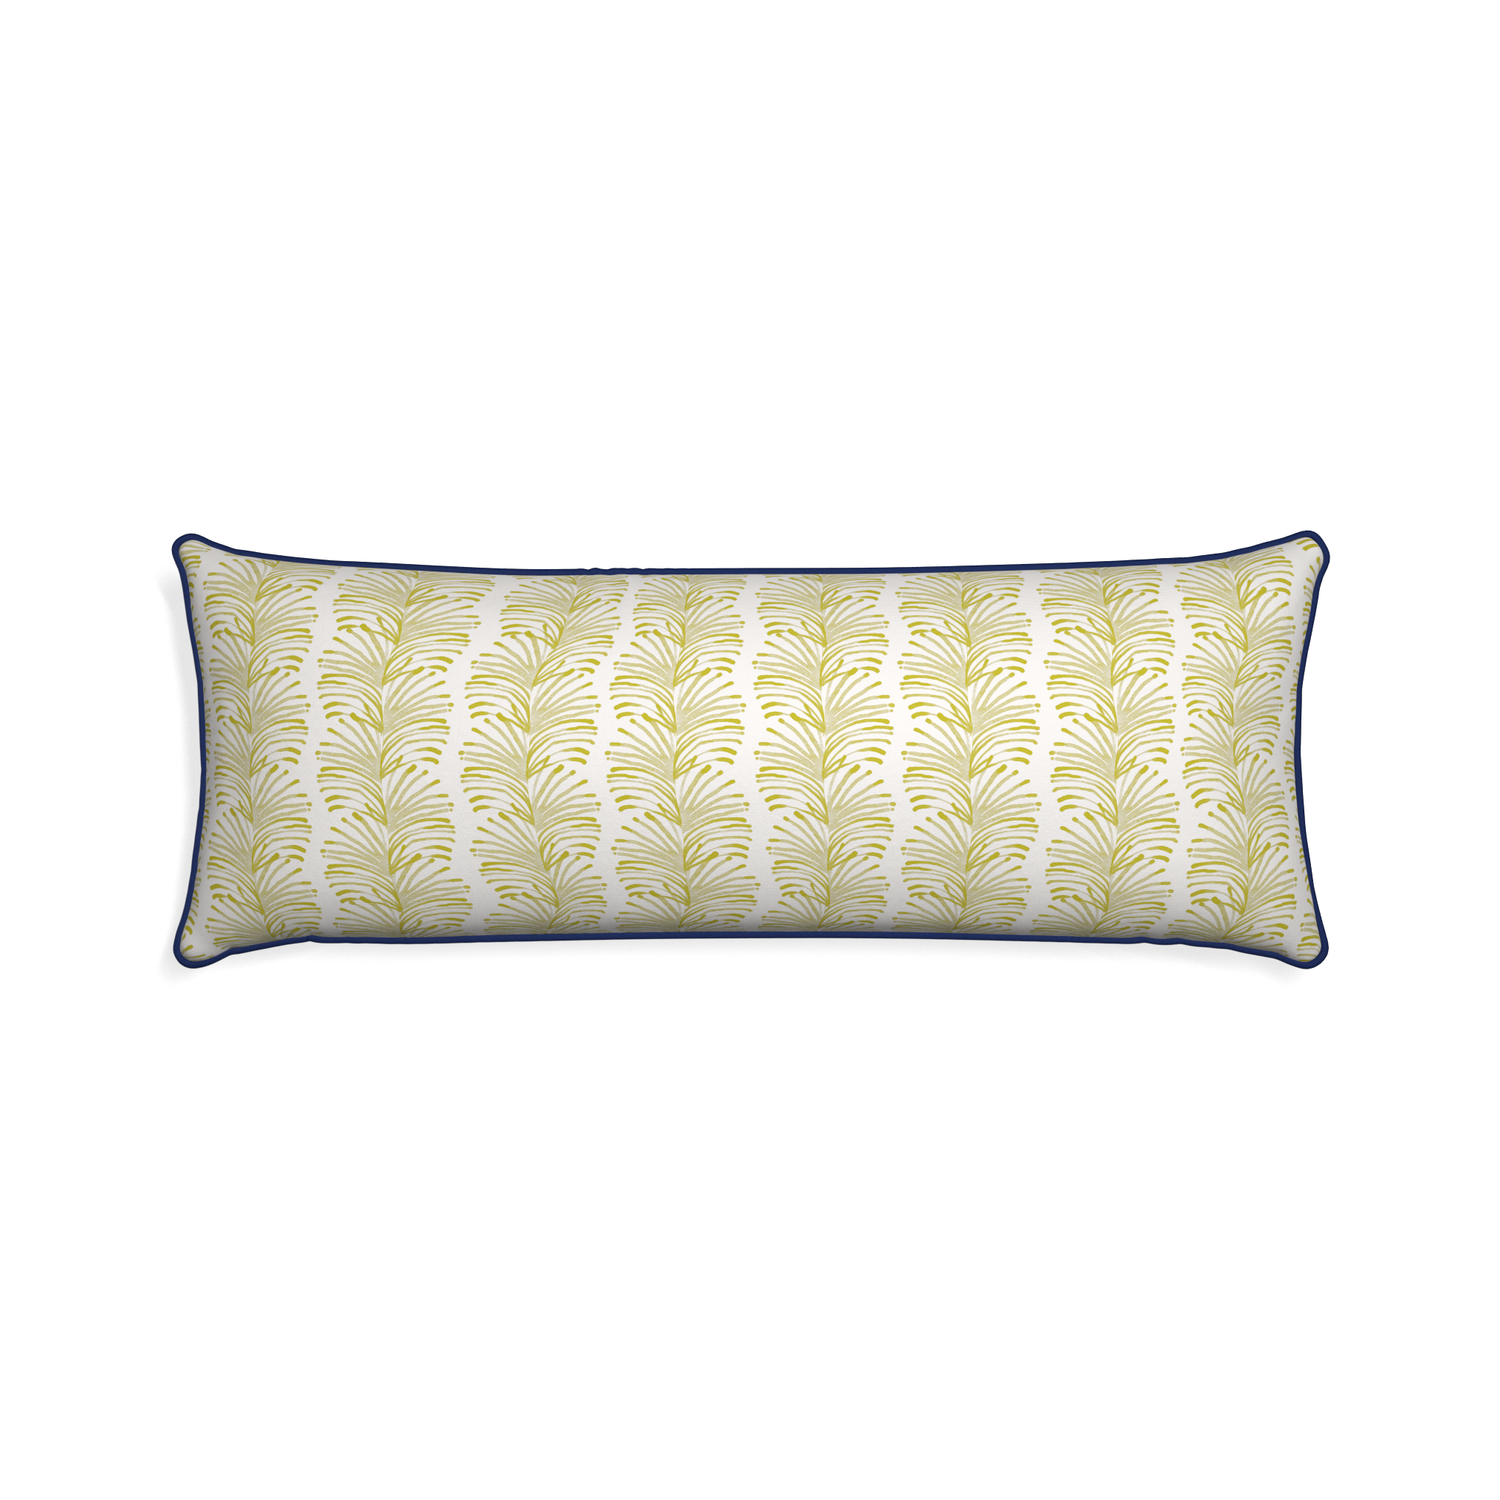 Xl-lumbar emma chartreuse custom yellow stripe chartreusepillow with midnight piping on white background